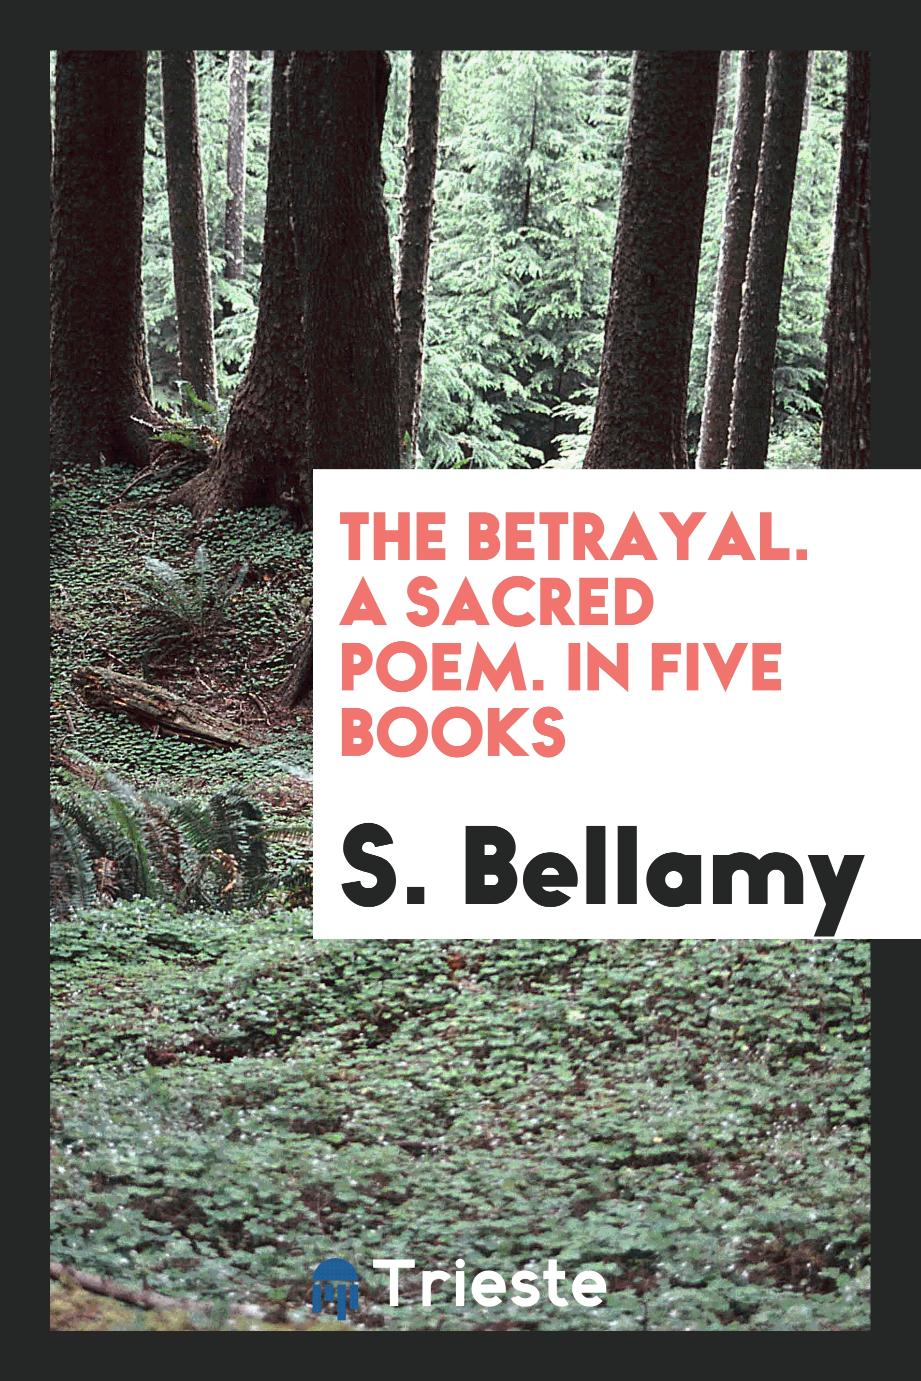 The Betrayal. A Sacred Poem. In Five Books